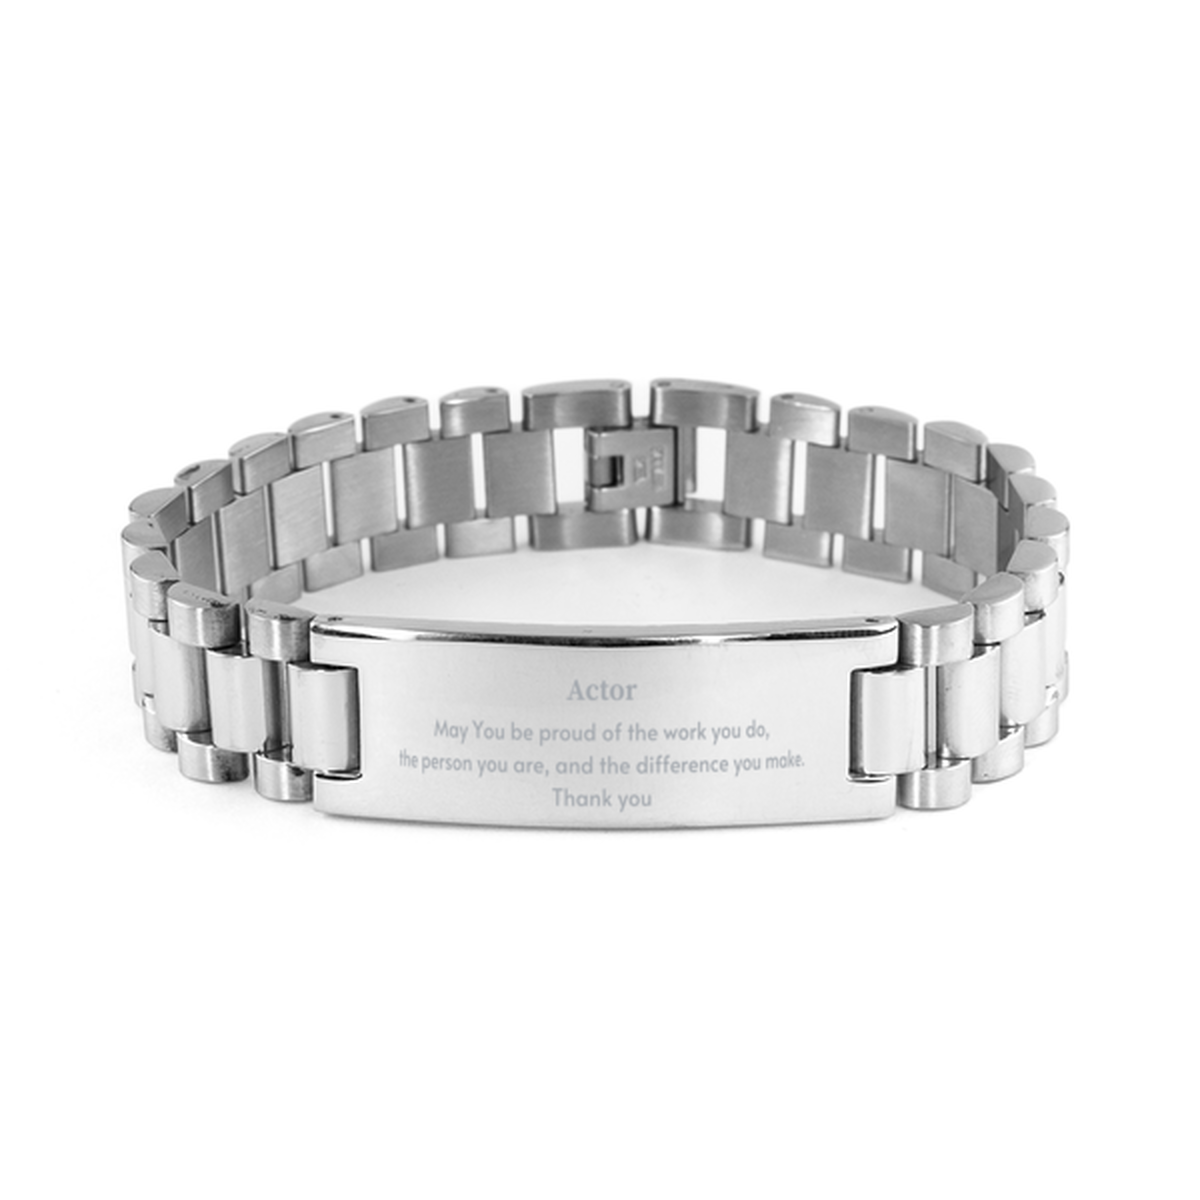 Heartwarming Ladder Stainless Steel Bracelet Retirement Coworkers Gifts for Actor, Actor May You be proud of the work you do, the person you are Gifts for Boss Men Women Friends